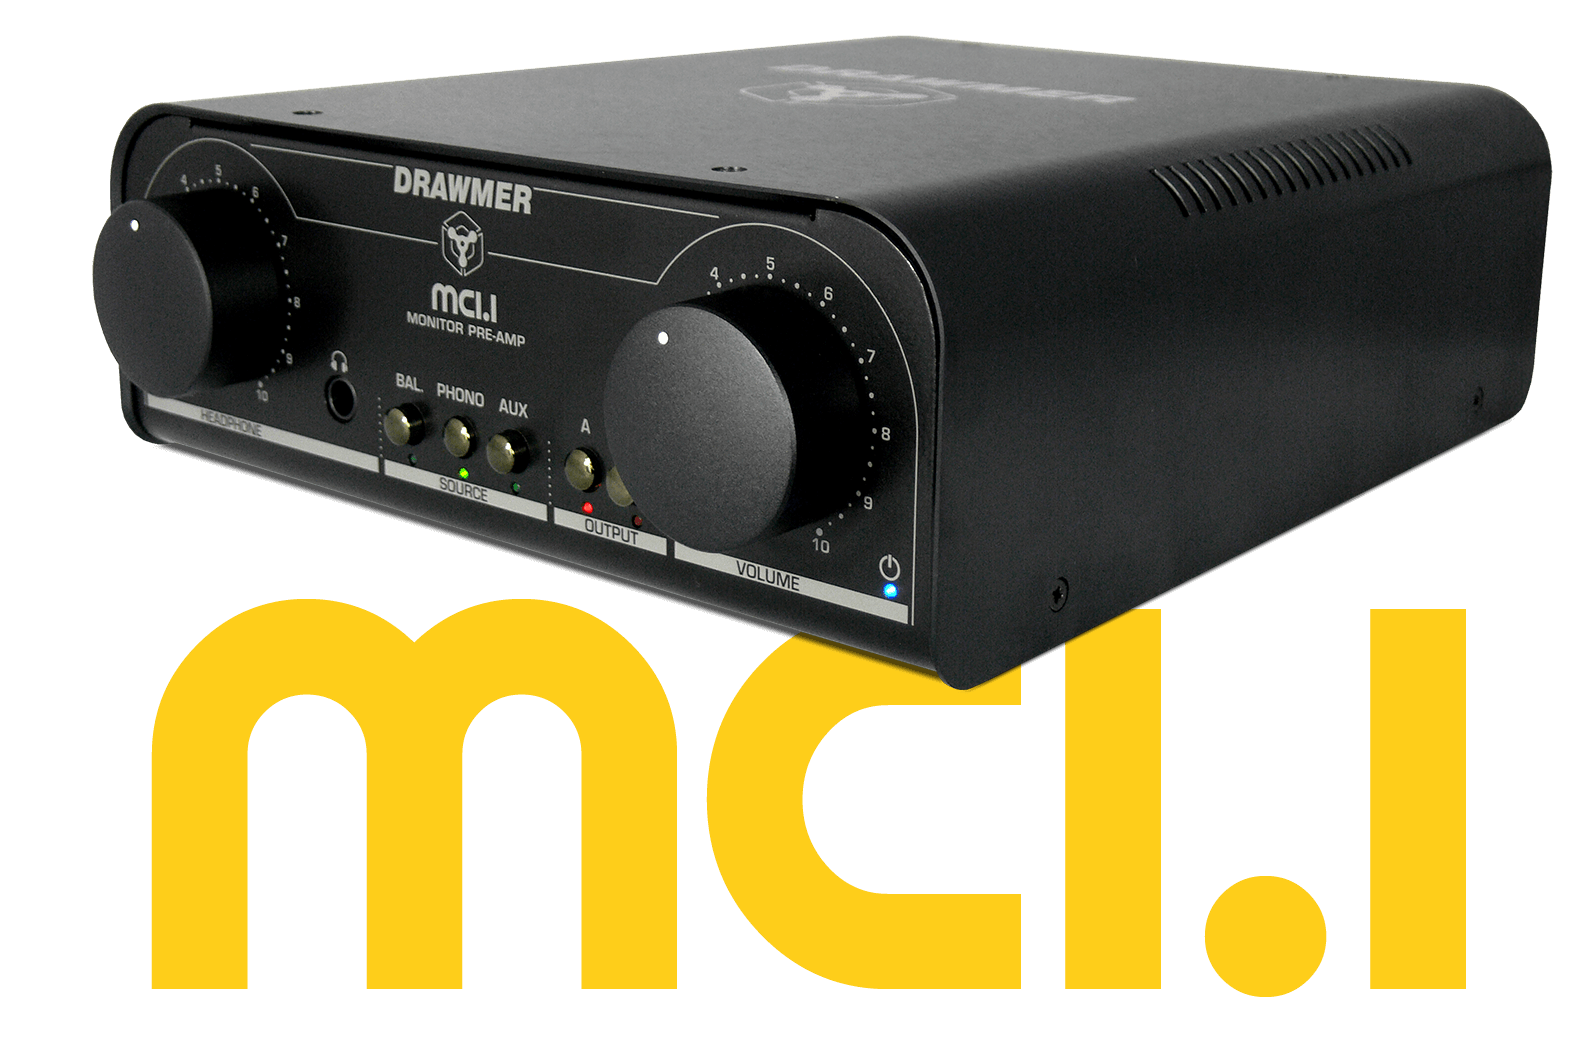  View of the MC1.1 looking from the right side with the logo below in yellow